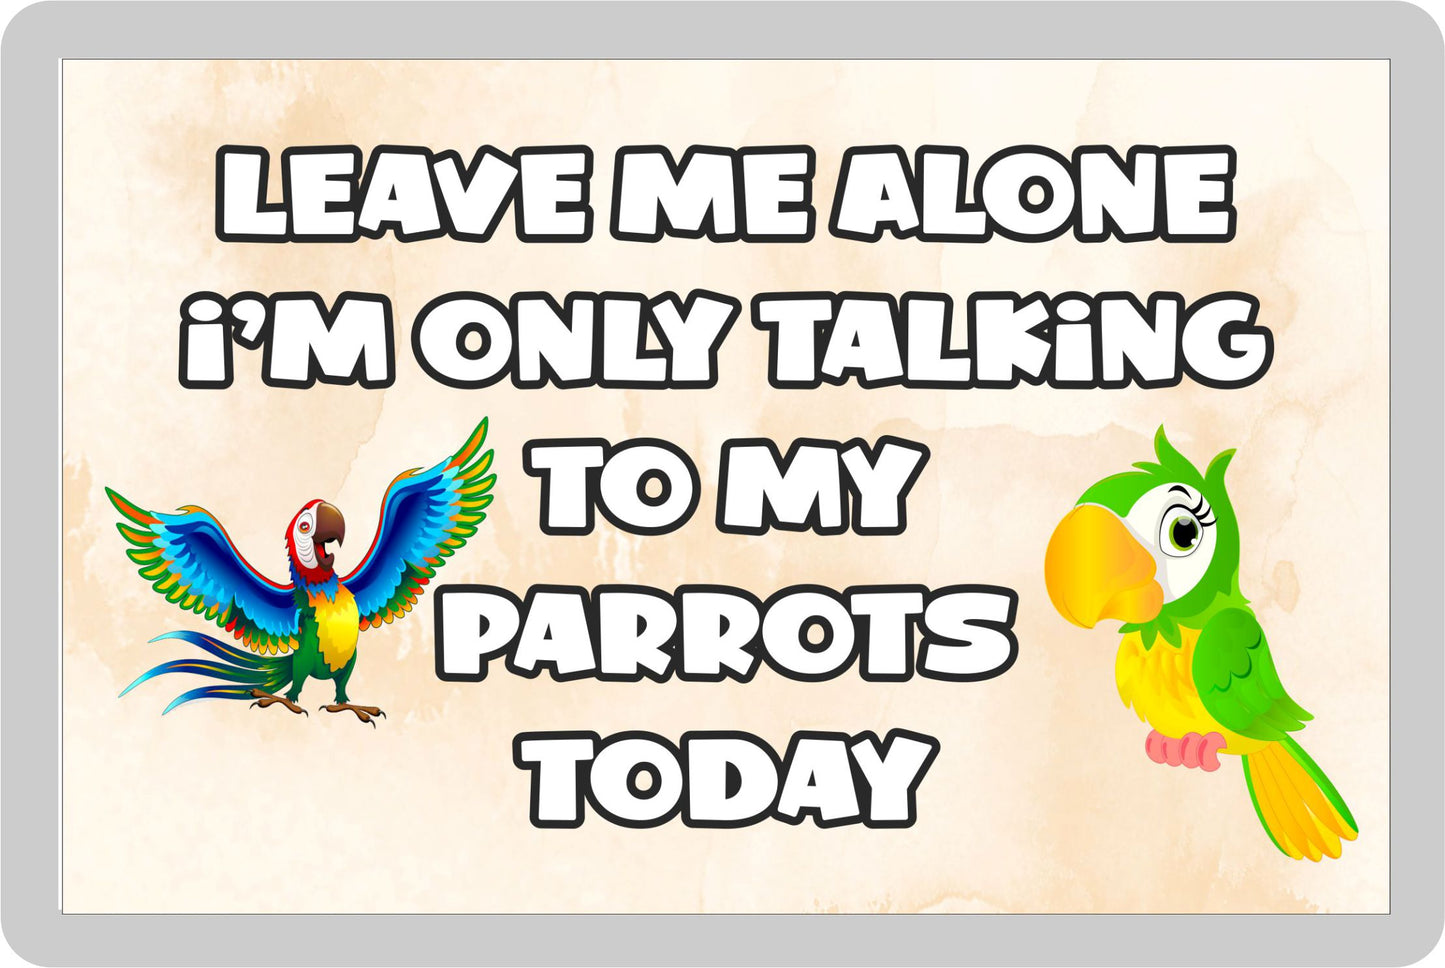 Parrot Fridge Magnet Gift - Leave Me Alone I'm Only Talking To My * Today - Novelty Cute Bird Animal Present